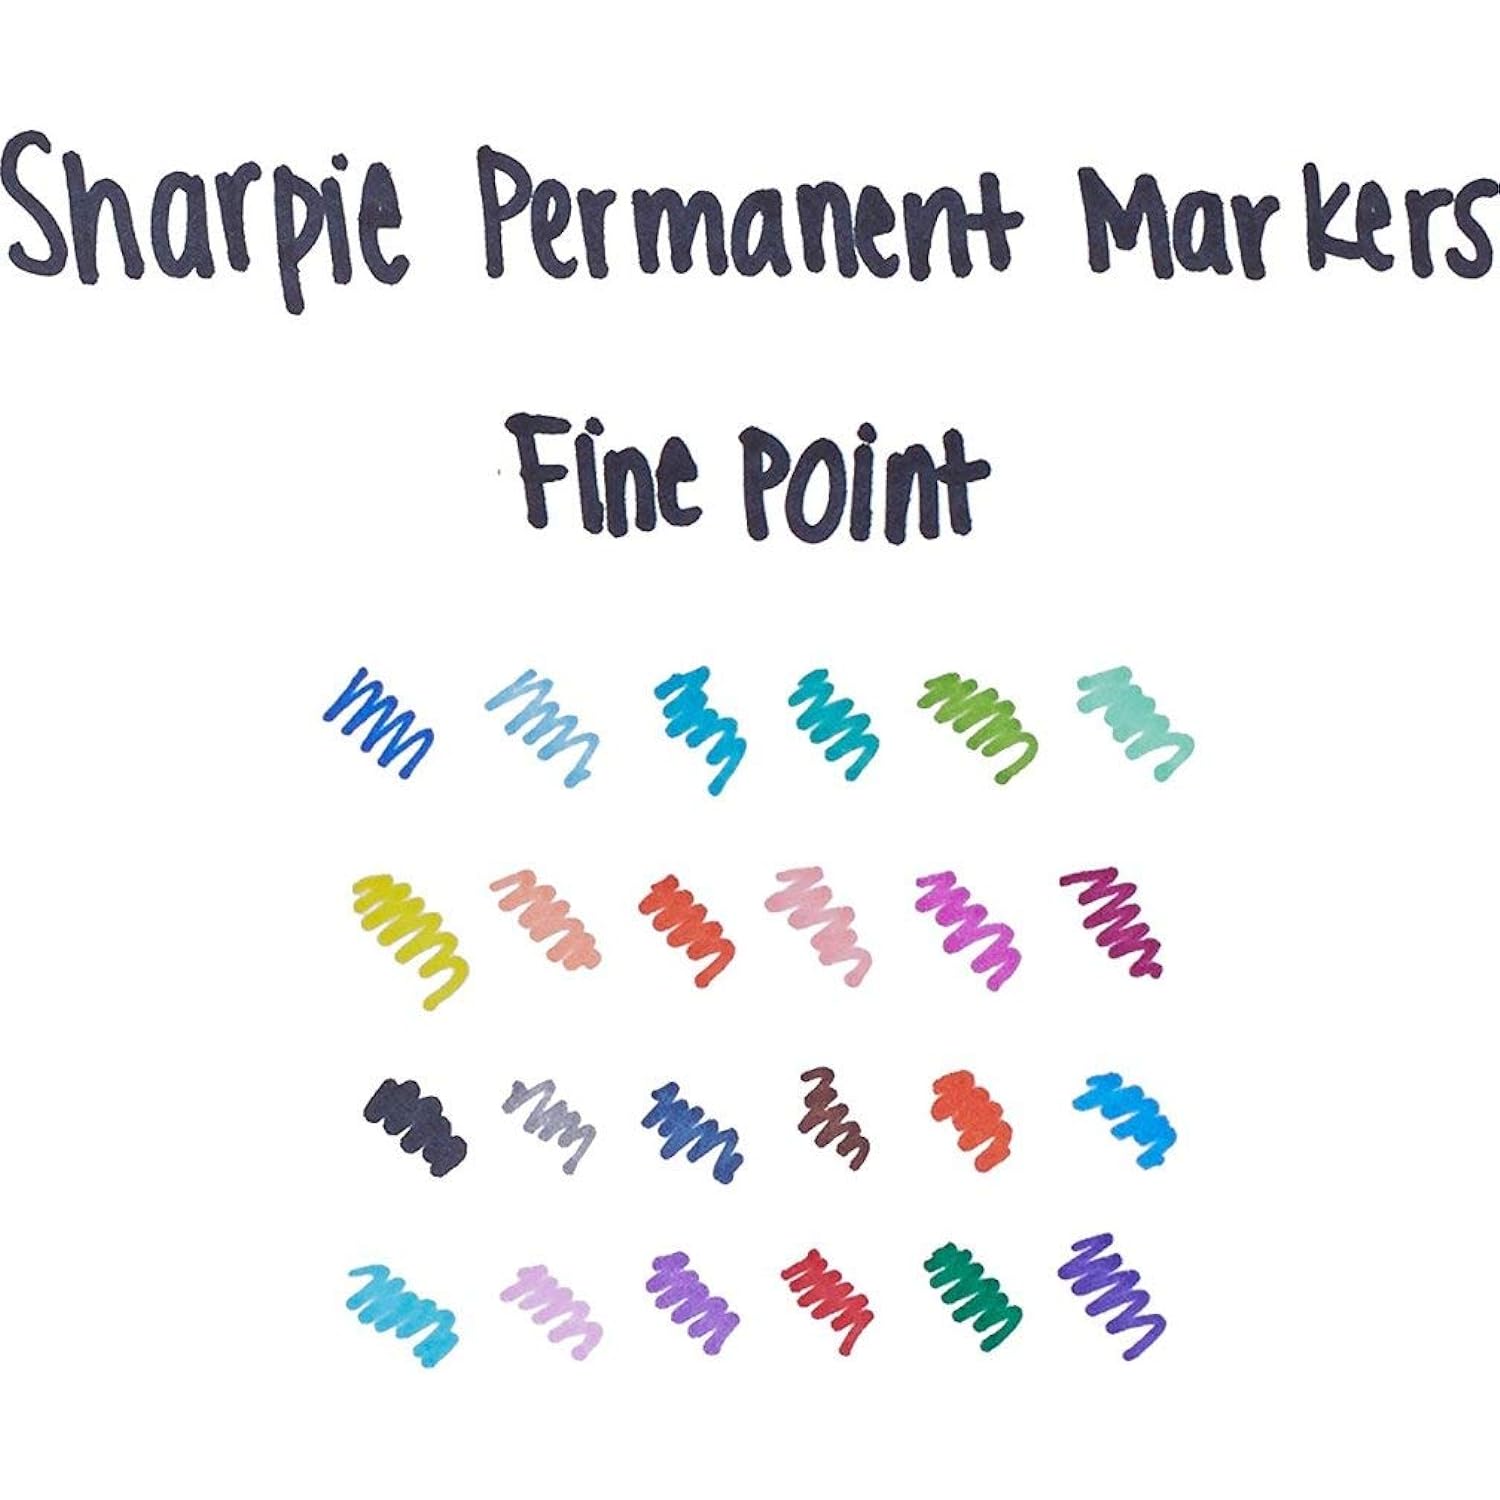 Sharpie 75846 Fine Point Permanent Markers, Assorted Colors; 4 Sets of 24 Markers, Total 96 Markers; Proudly Permanent Ink …